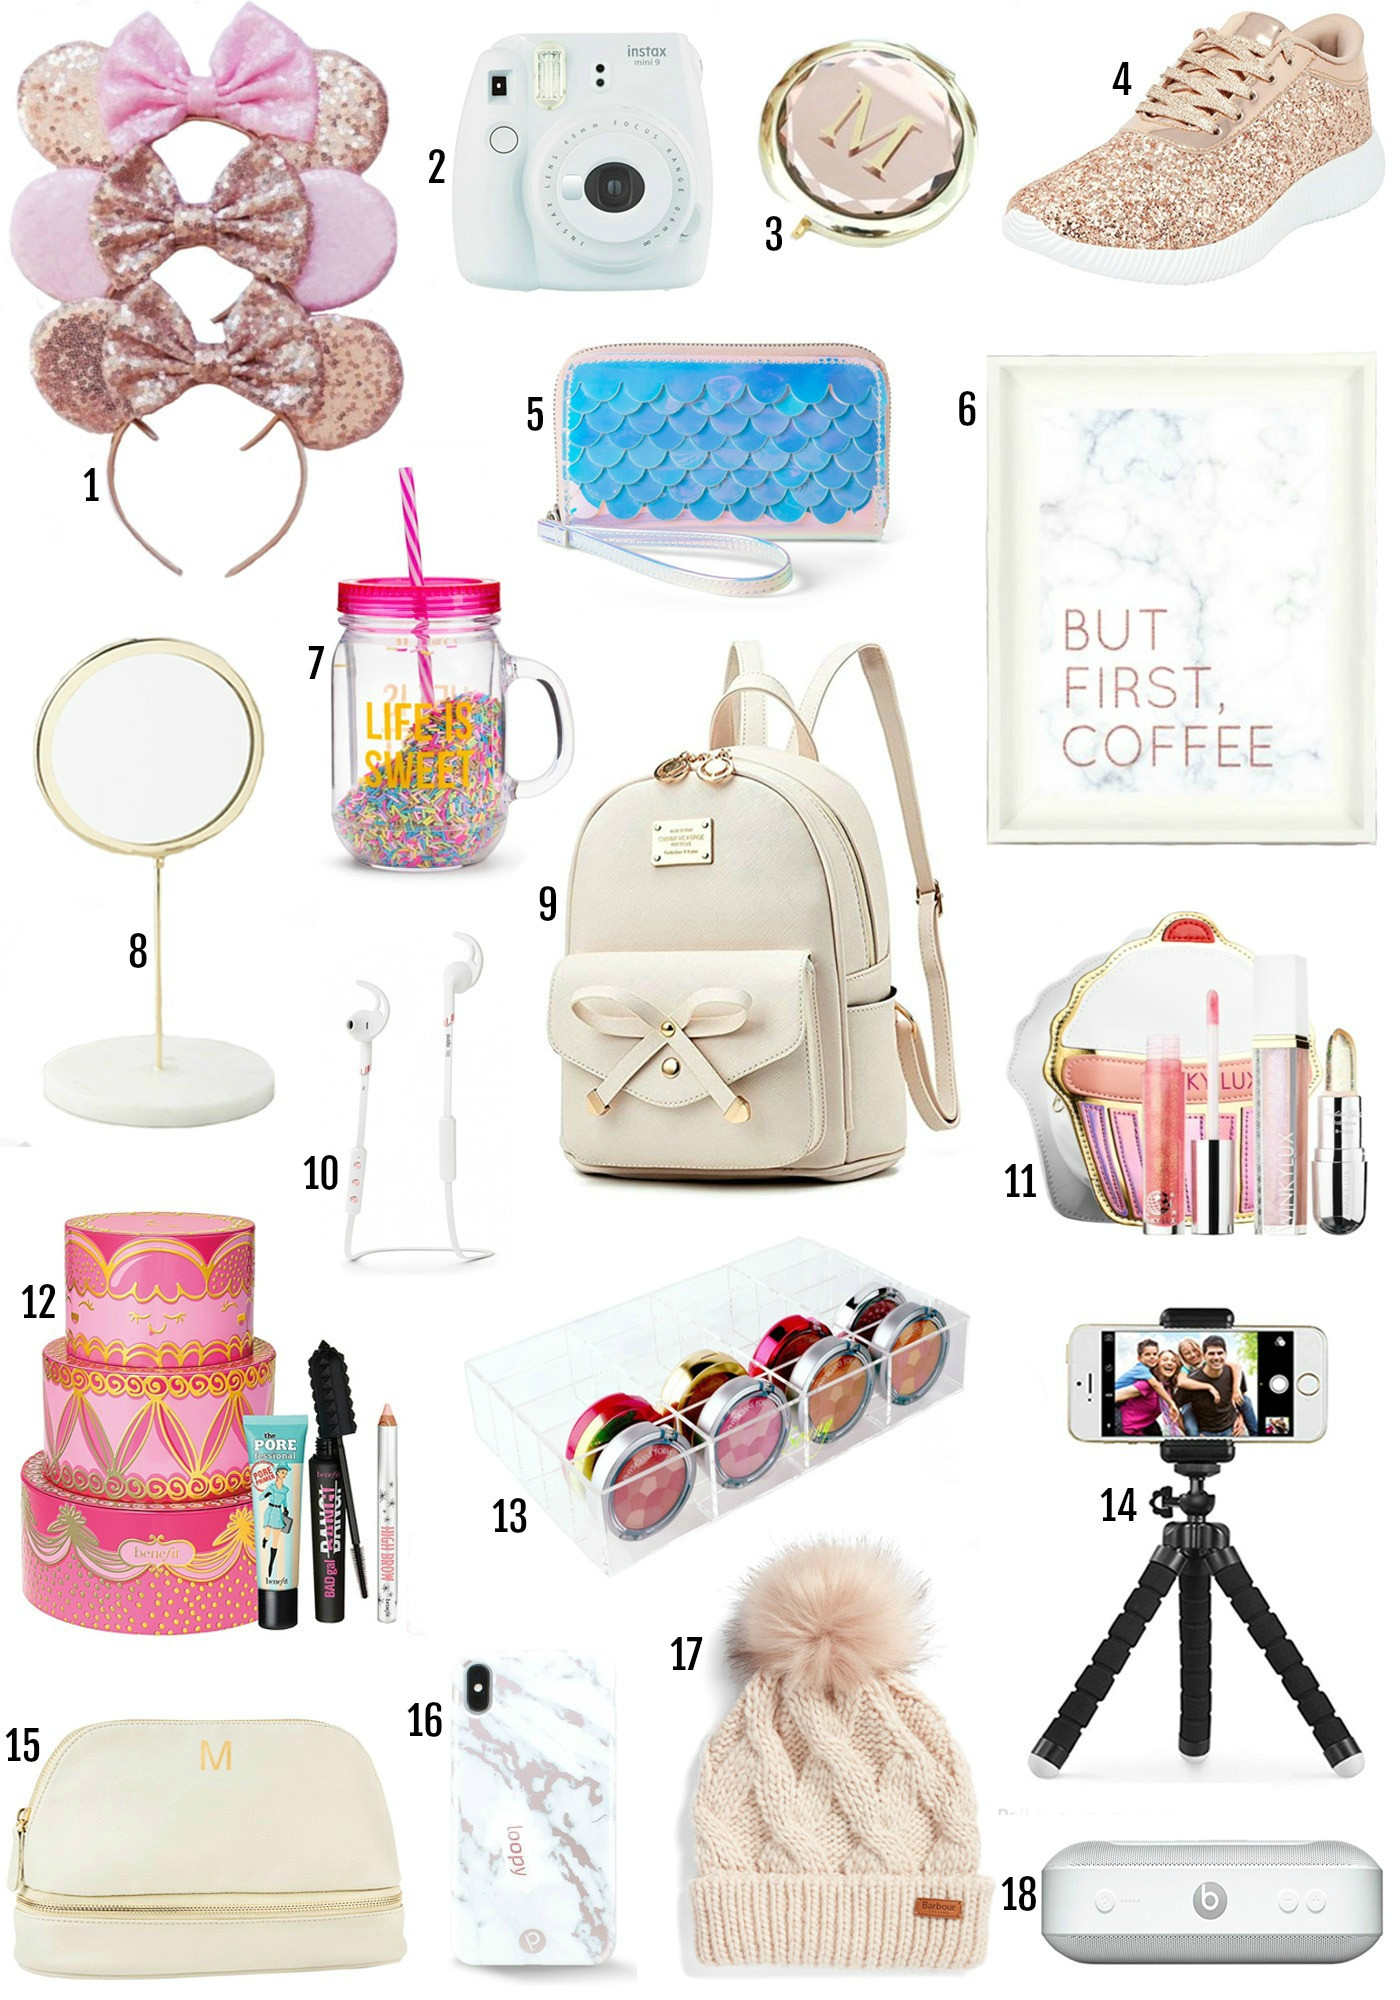 Top Gift Ideas For Teen Girls
 Top Gifts For Teens